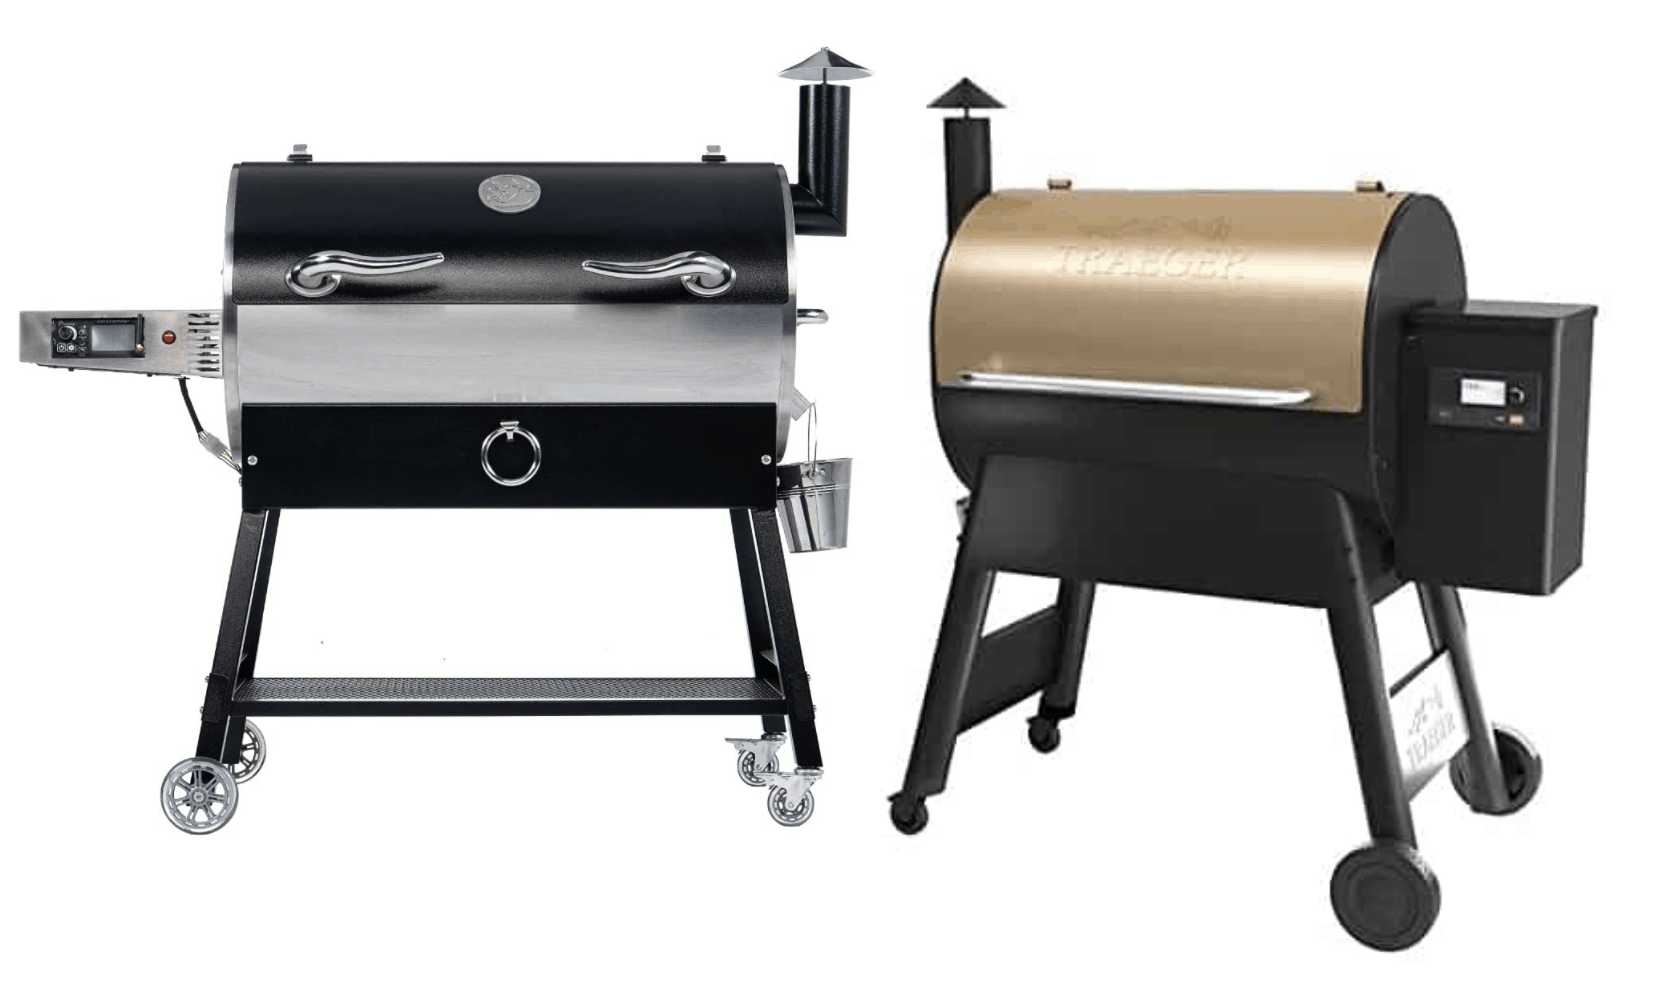 Recteq vs Traeger | Comparing two great pellet grill brands